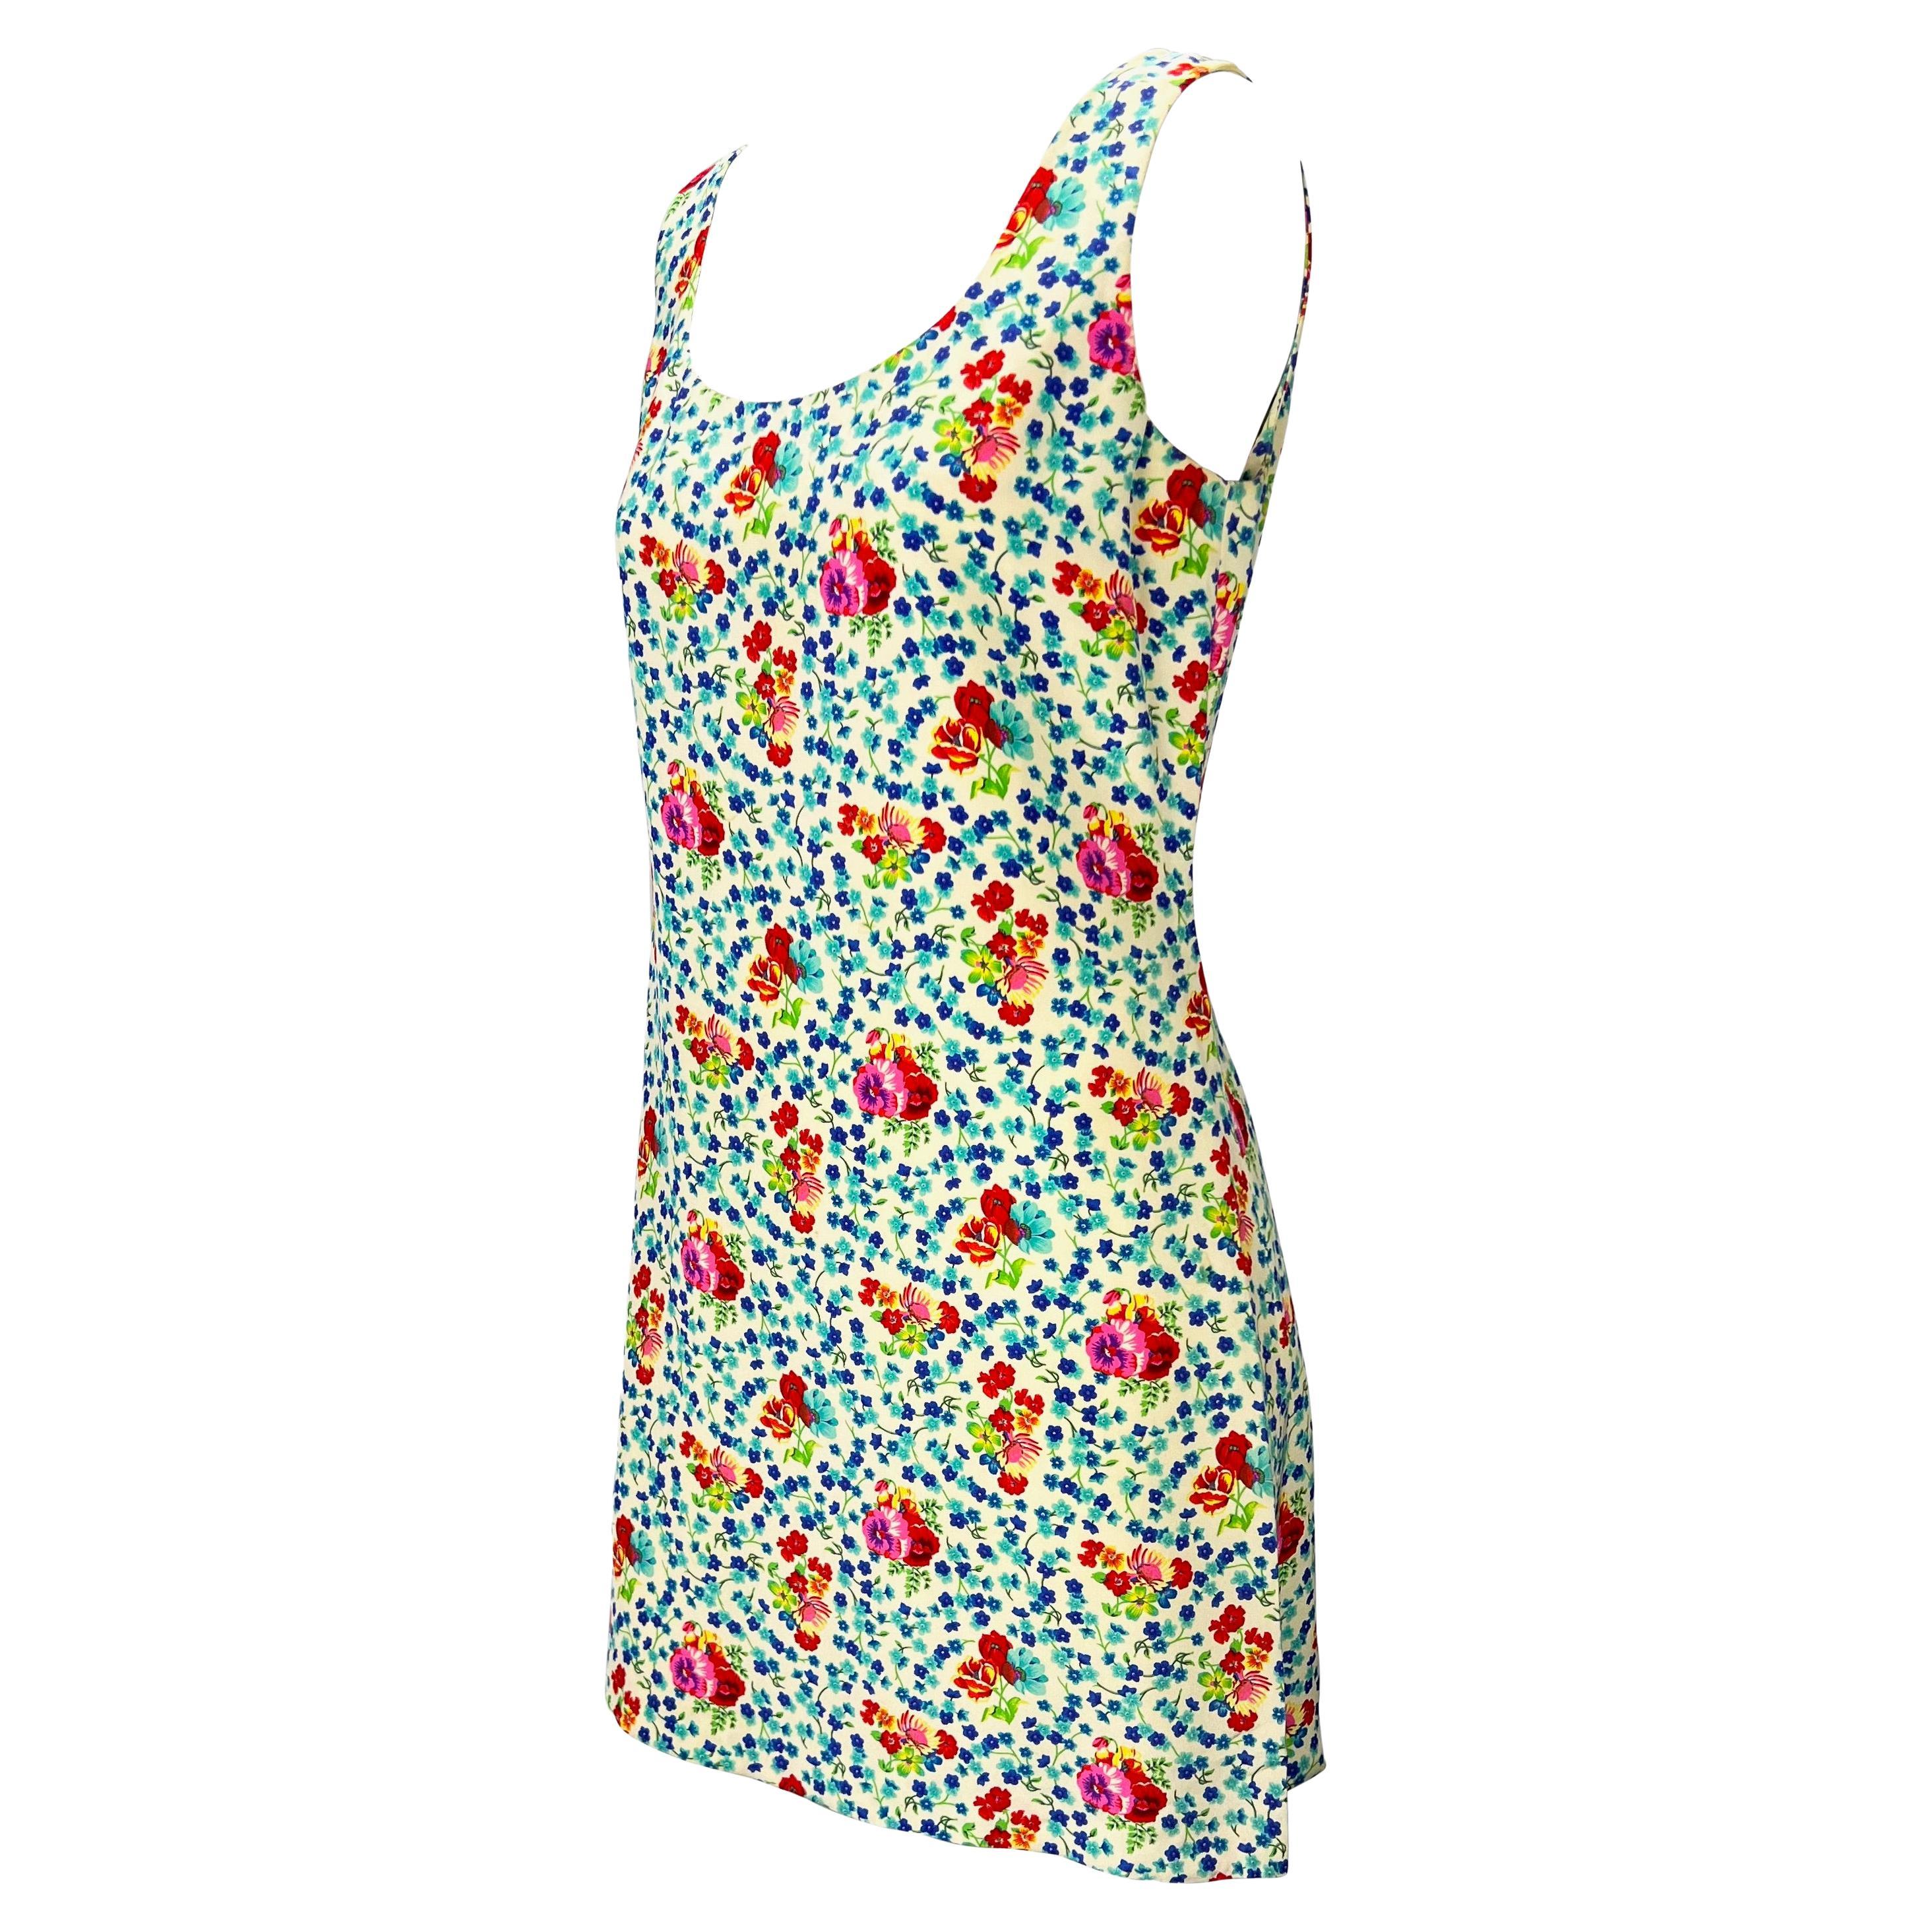 Presenting a classic floral dress, designed by Gianni Versace. From the mid-1990s this vibrant off-white sleeveless dress is covered in a bright floral print. The dress features a scoop neckline and a midi cut. 

Approximate measurements:
Size -